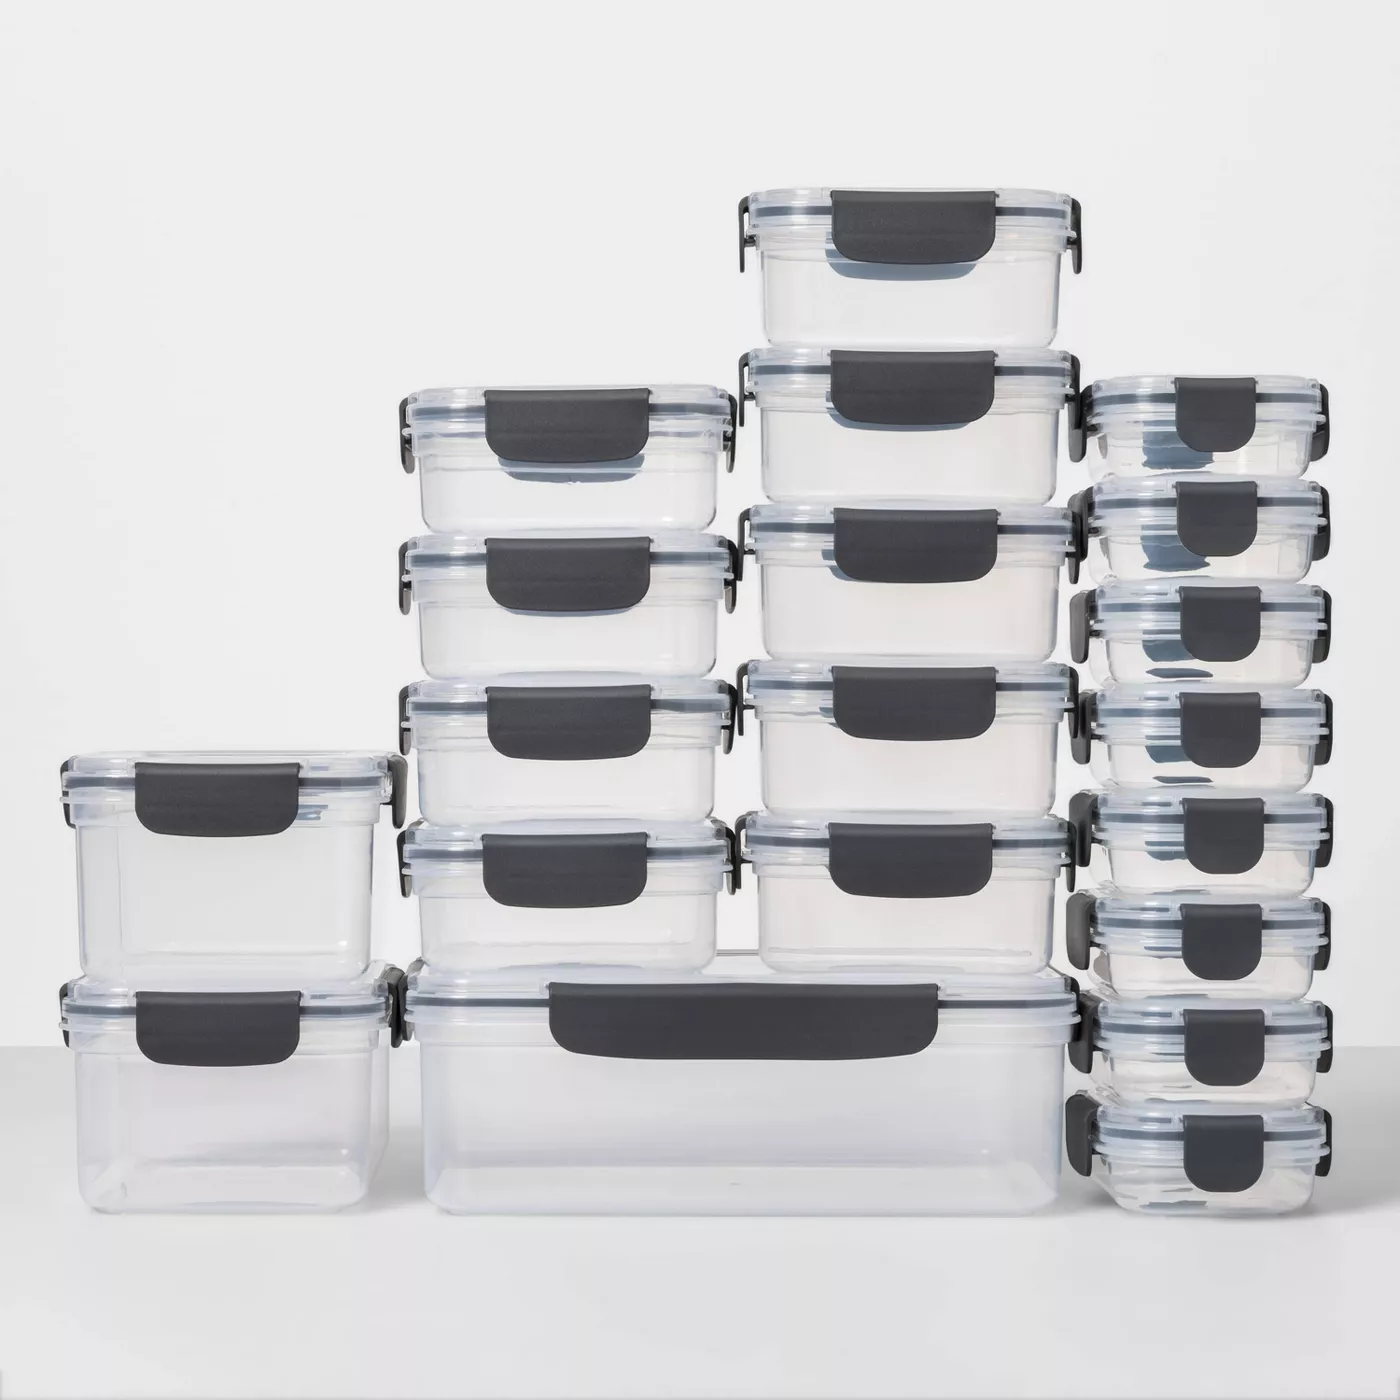 40pc Plastic Food Storage Set - Made By Design™ - image 1 of 4